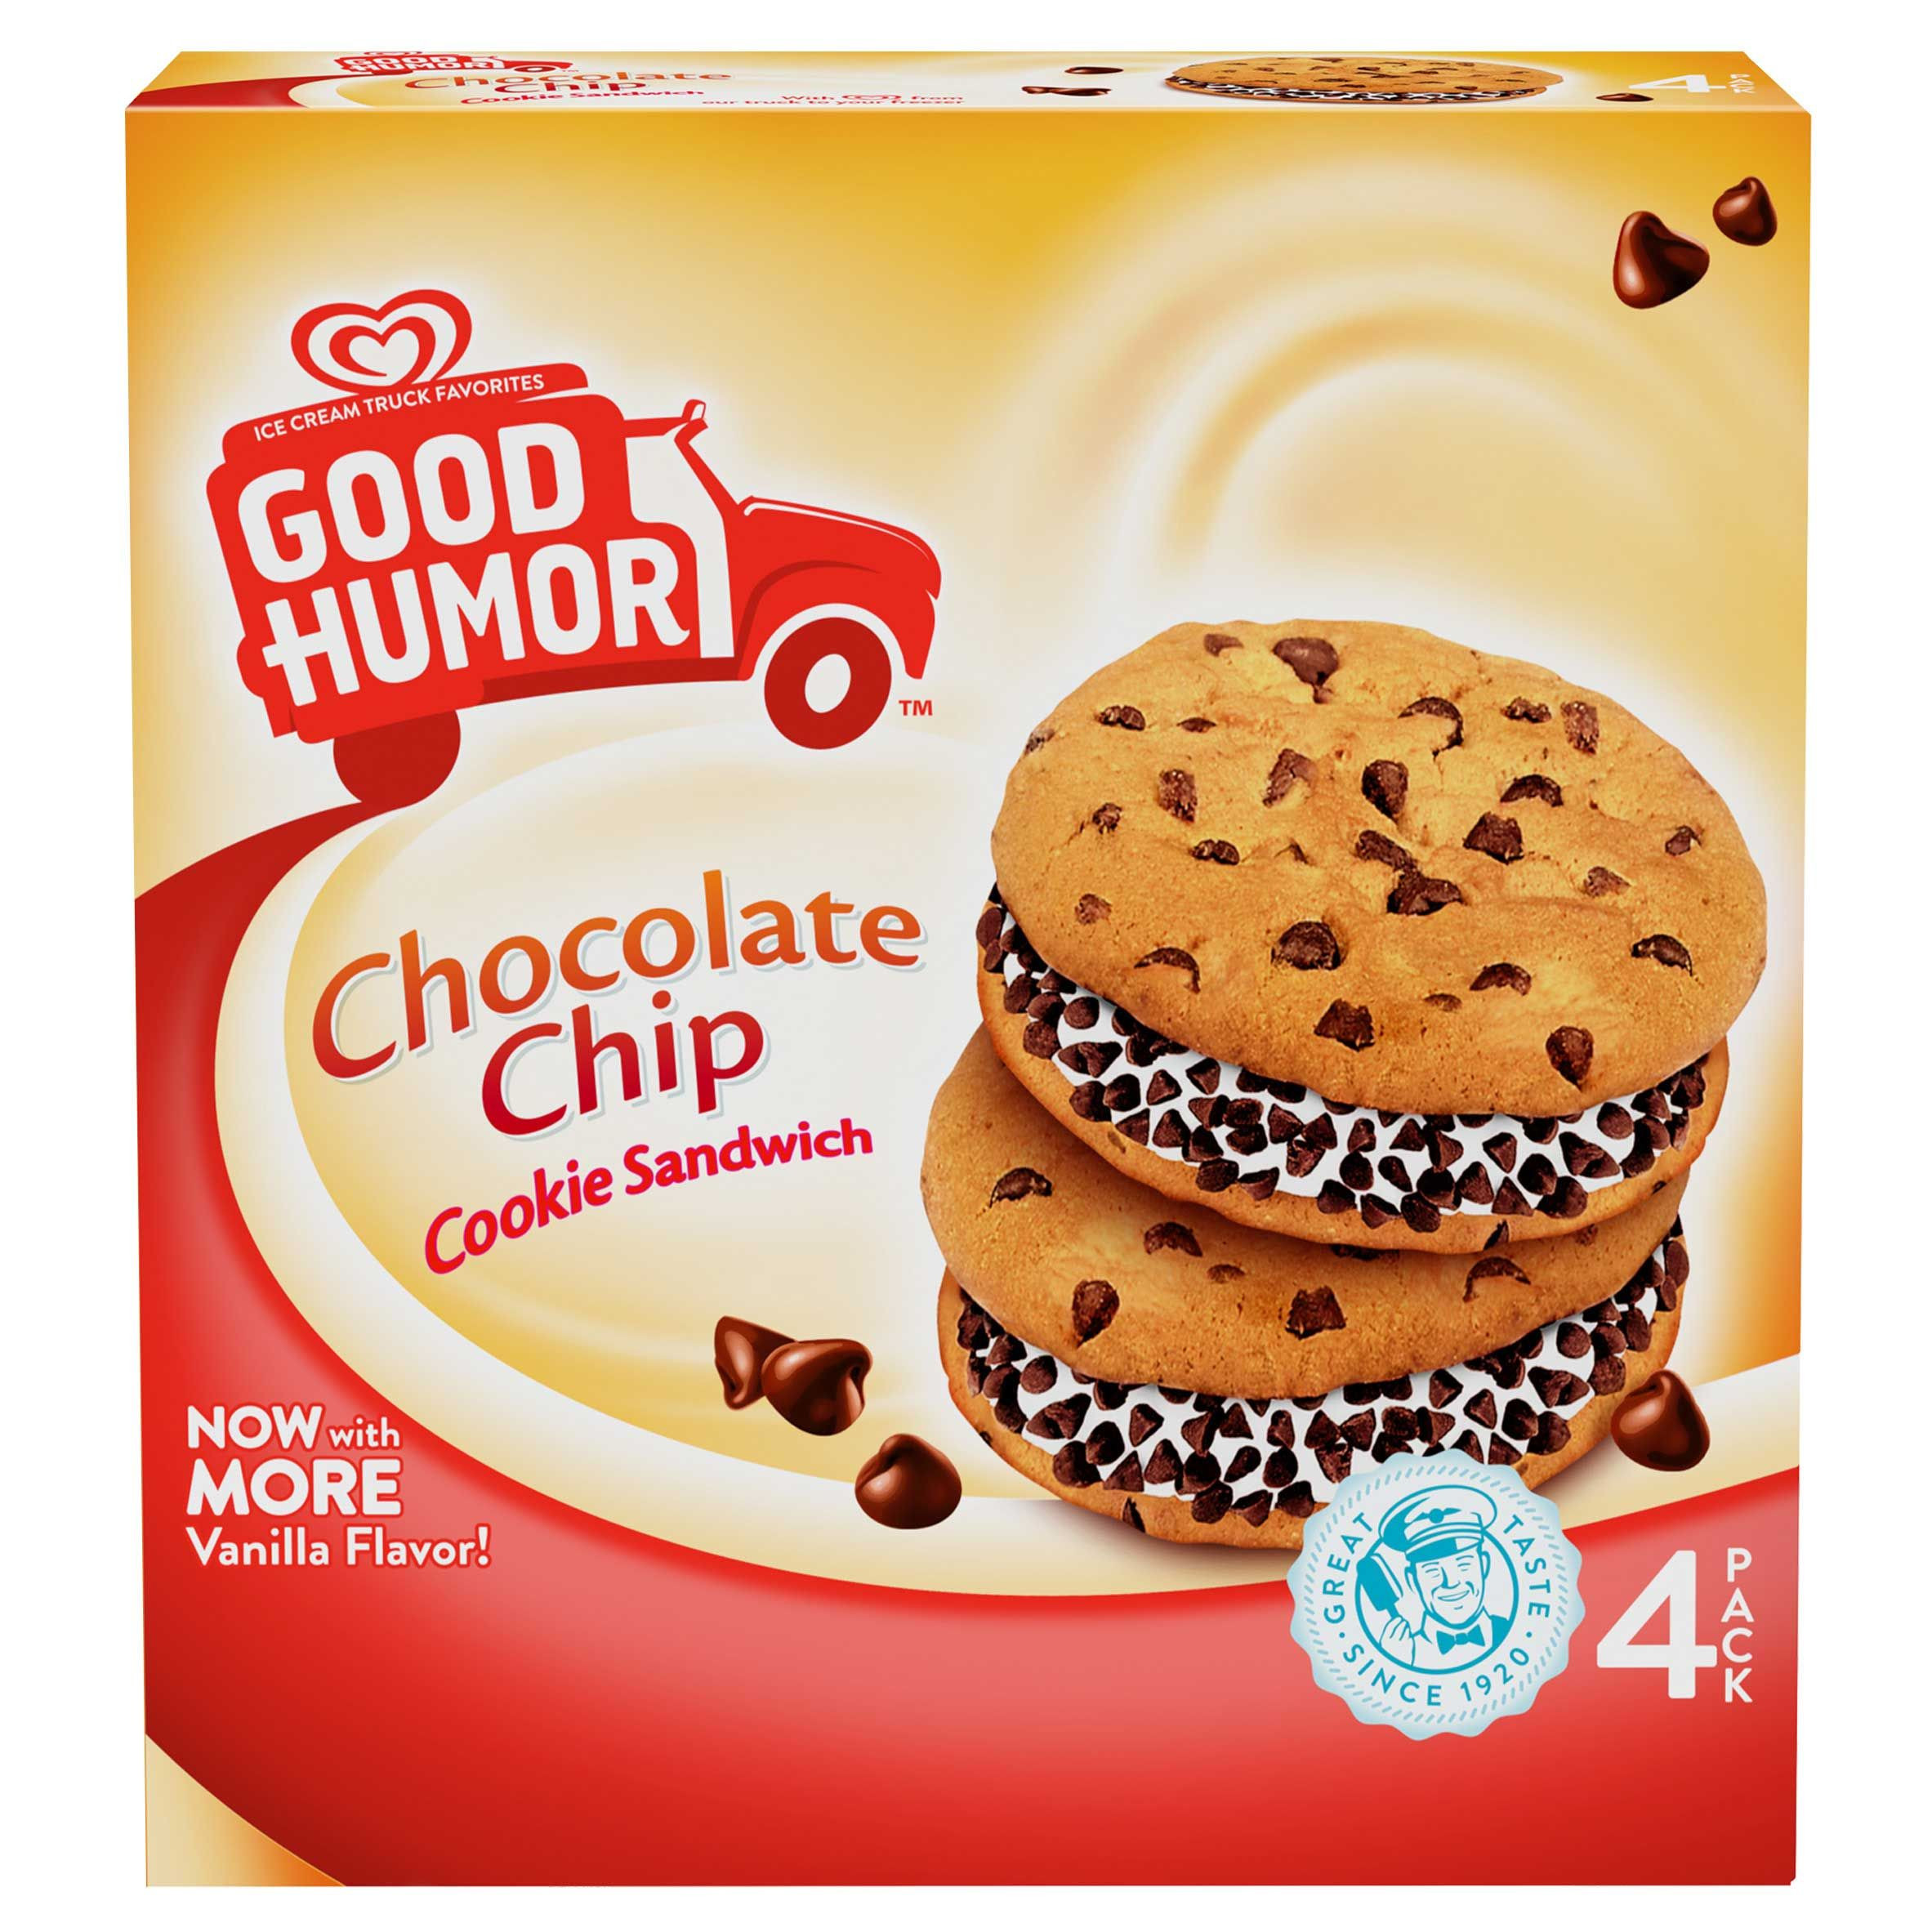 Sandwich Cookies Brands
 Good Humor Chocolate Chip Cookie Sandwich will be